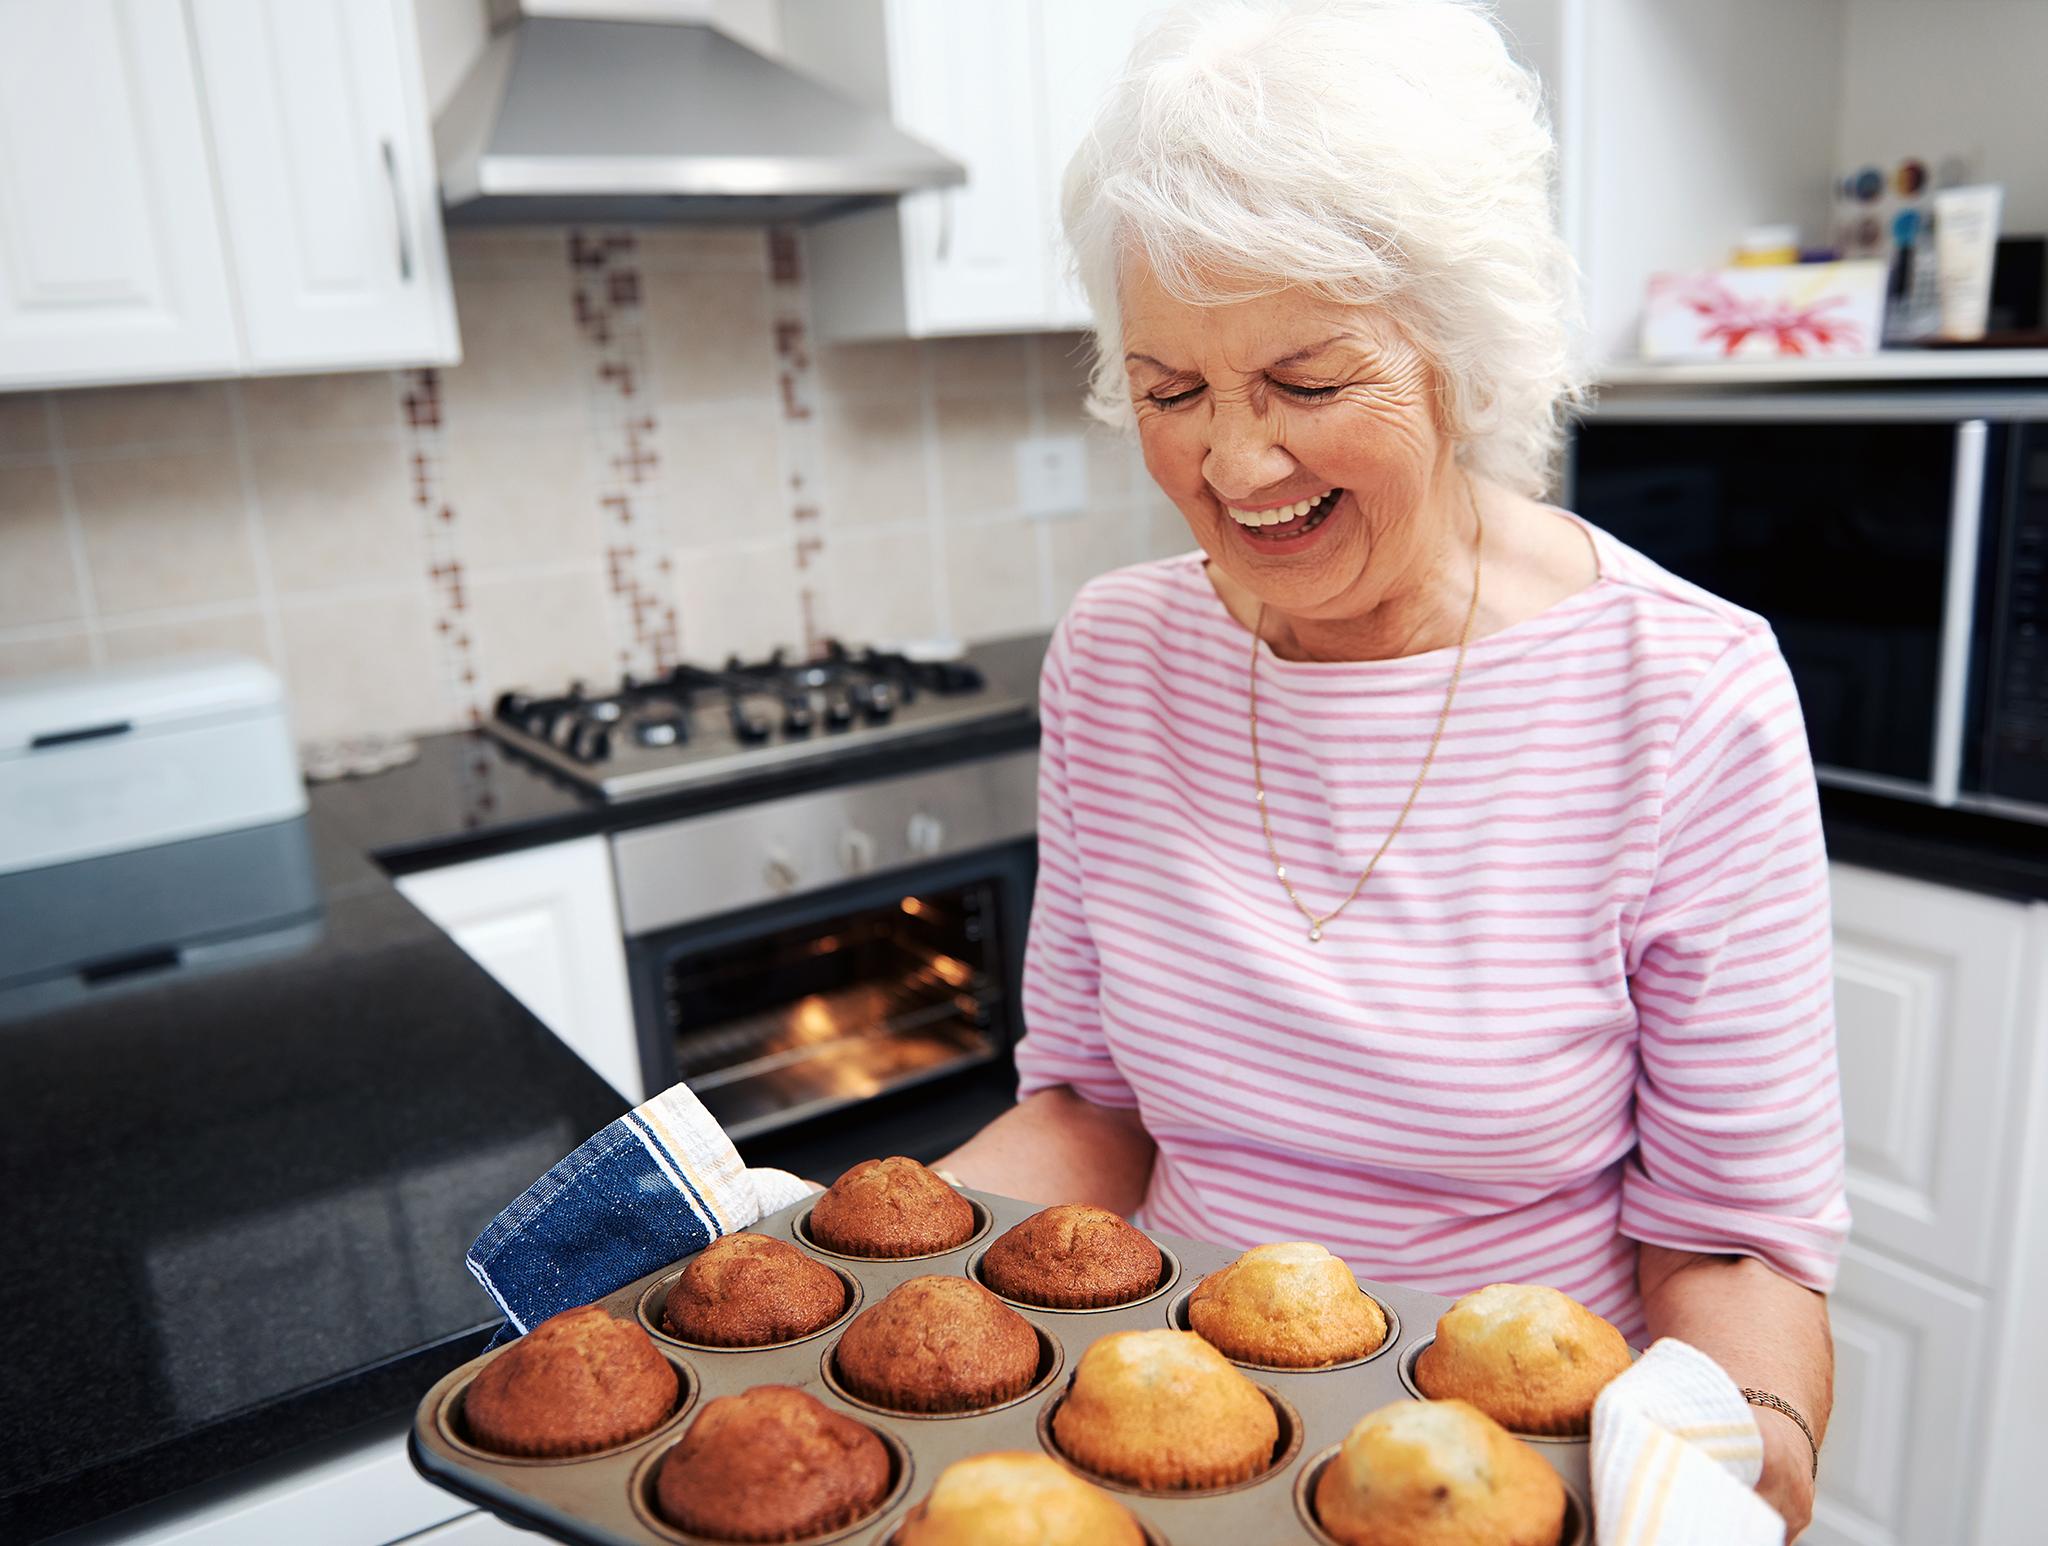 Elderly people lead the way in culinary skills too, with over 55s being most likely to know how to bake without referring to a recipe book